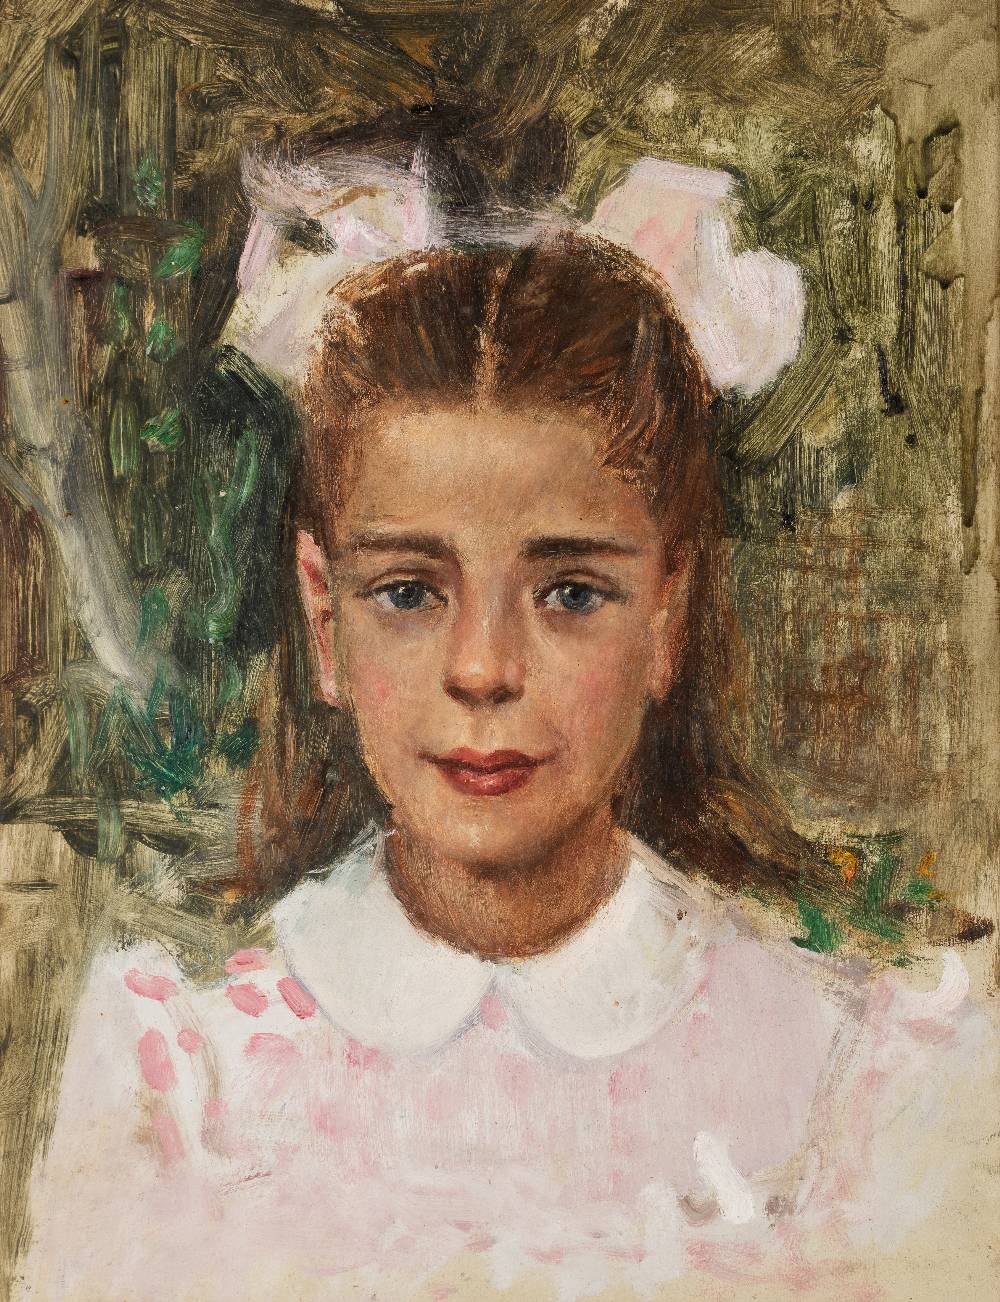 • GUERI DA SANTOMIO (20th CENTURY) PORTRAIT OF A YOUNG GIRL sold together with a portrait by the